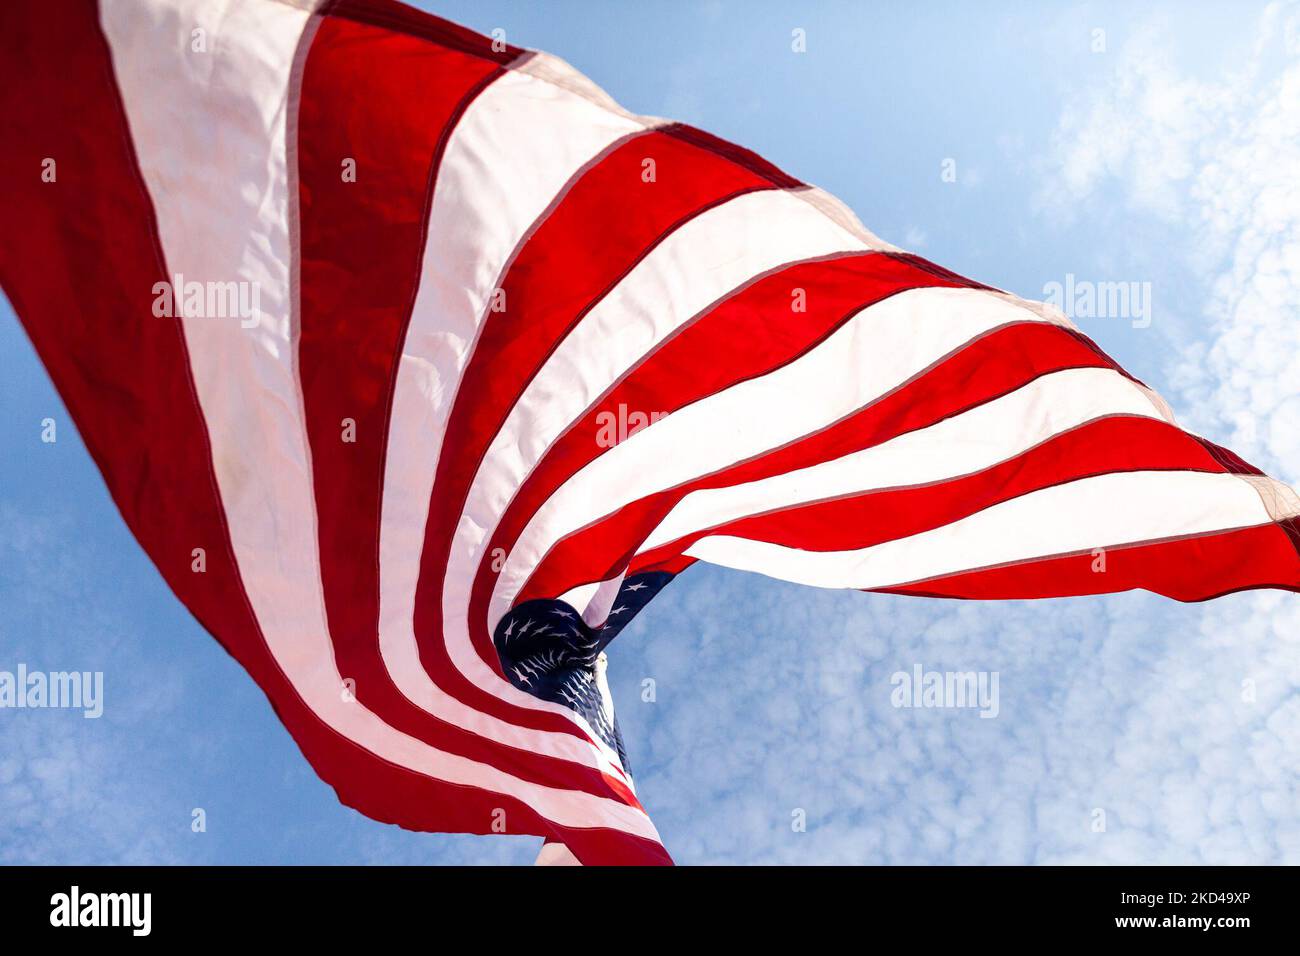 An American flag fliesduring a rally against white nationalism hosted by military veteran organizations Continue to Serve and Common Defense. Organizers held the rally to counter messaging from some in the trucker convoy near Washington. (Photo by Allison Bailey/NurPhoto) Stock Photo